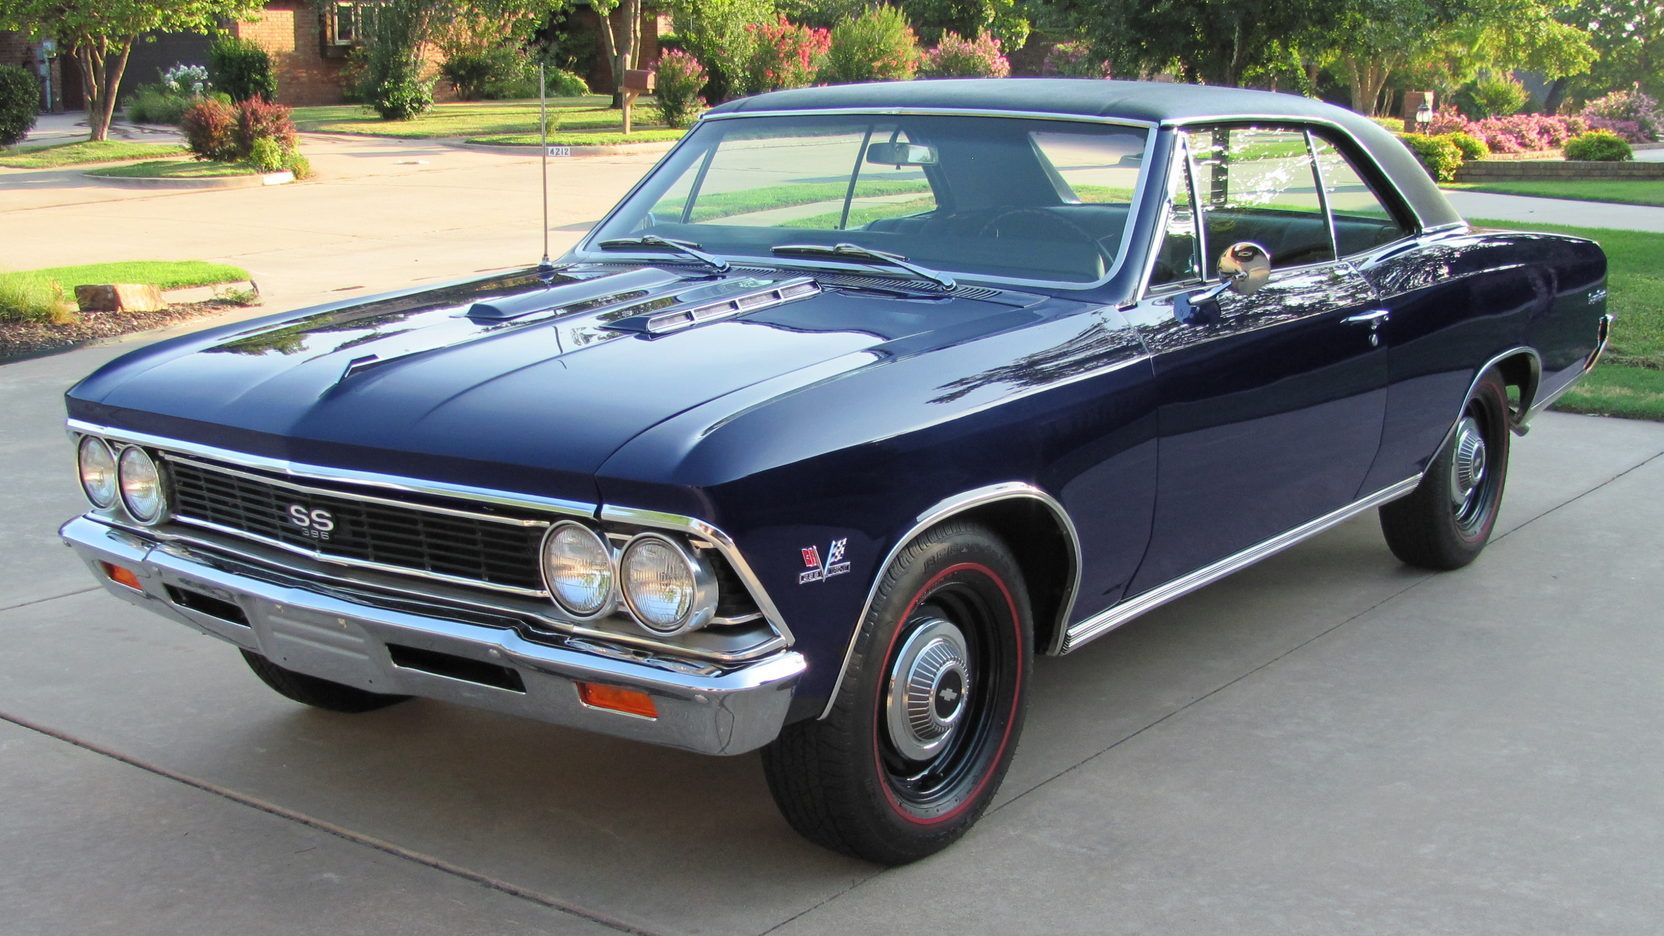 A parked 1966 Chevy Chevelle SS